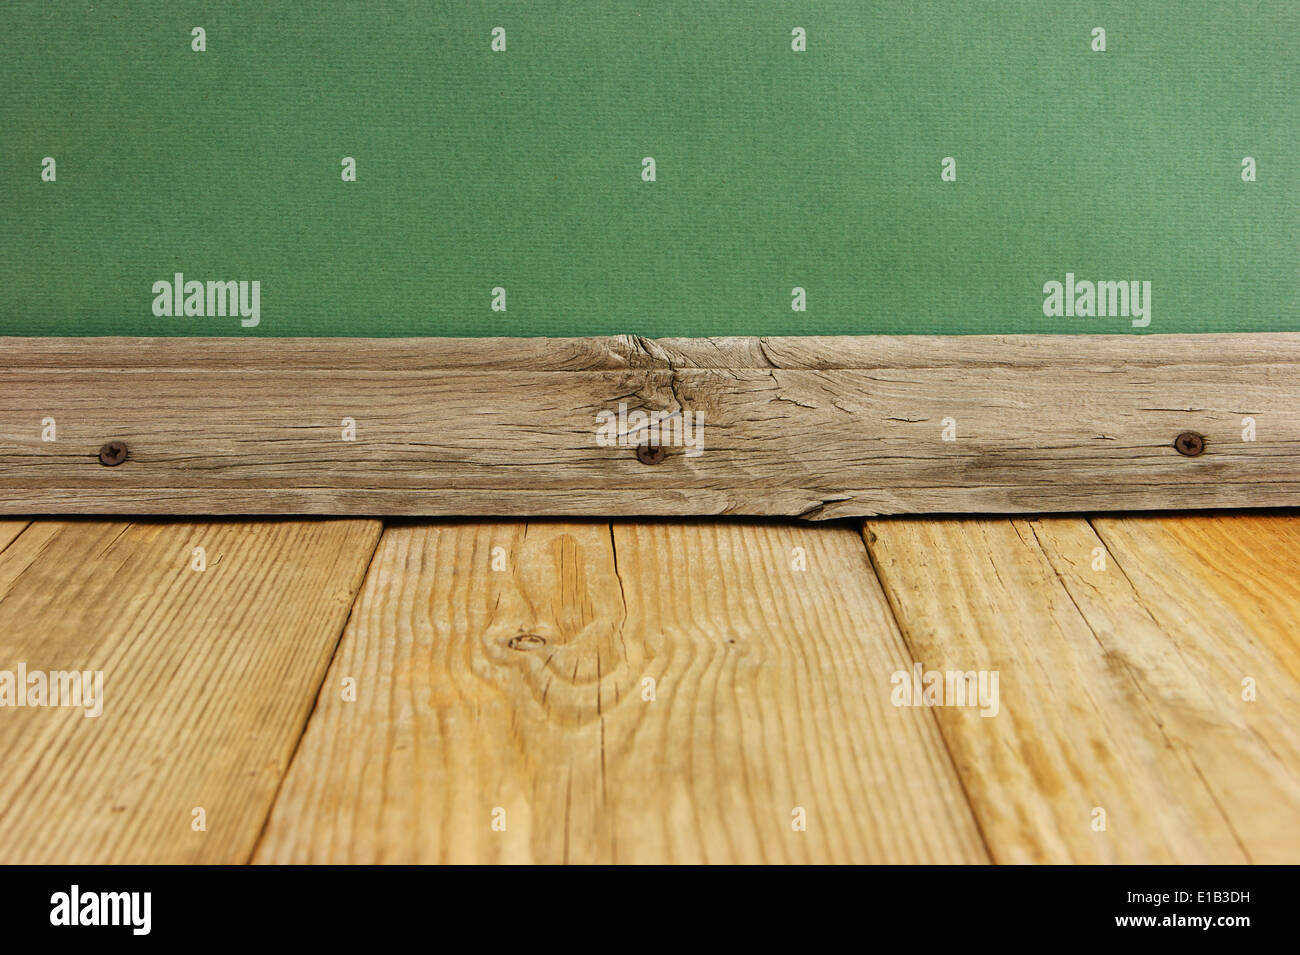 vintage wooden floor with green wall Stock Photo